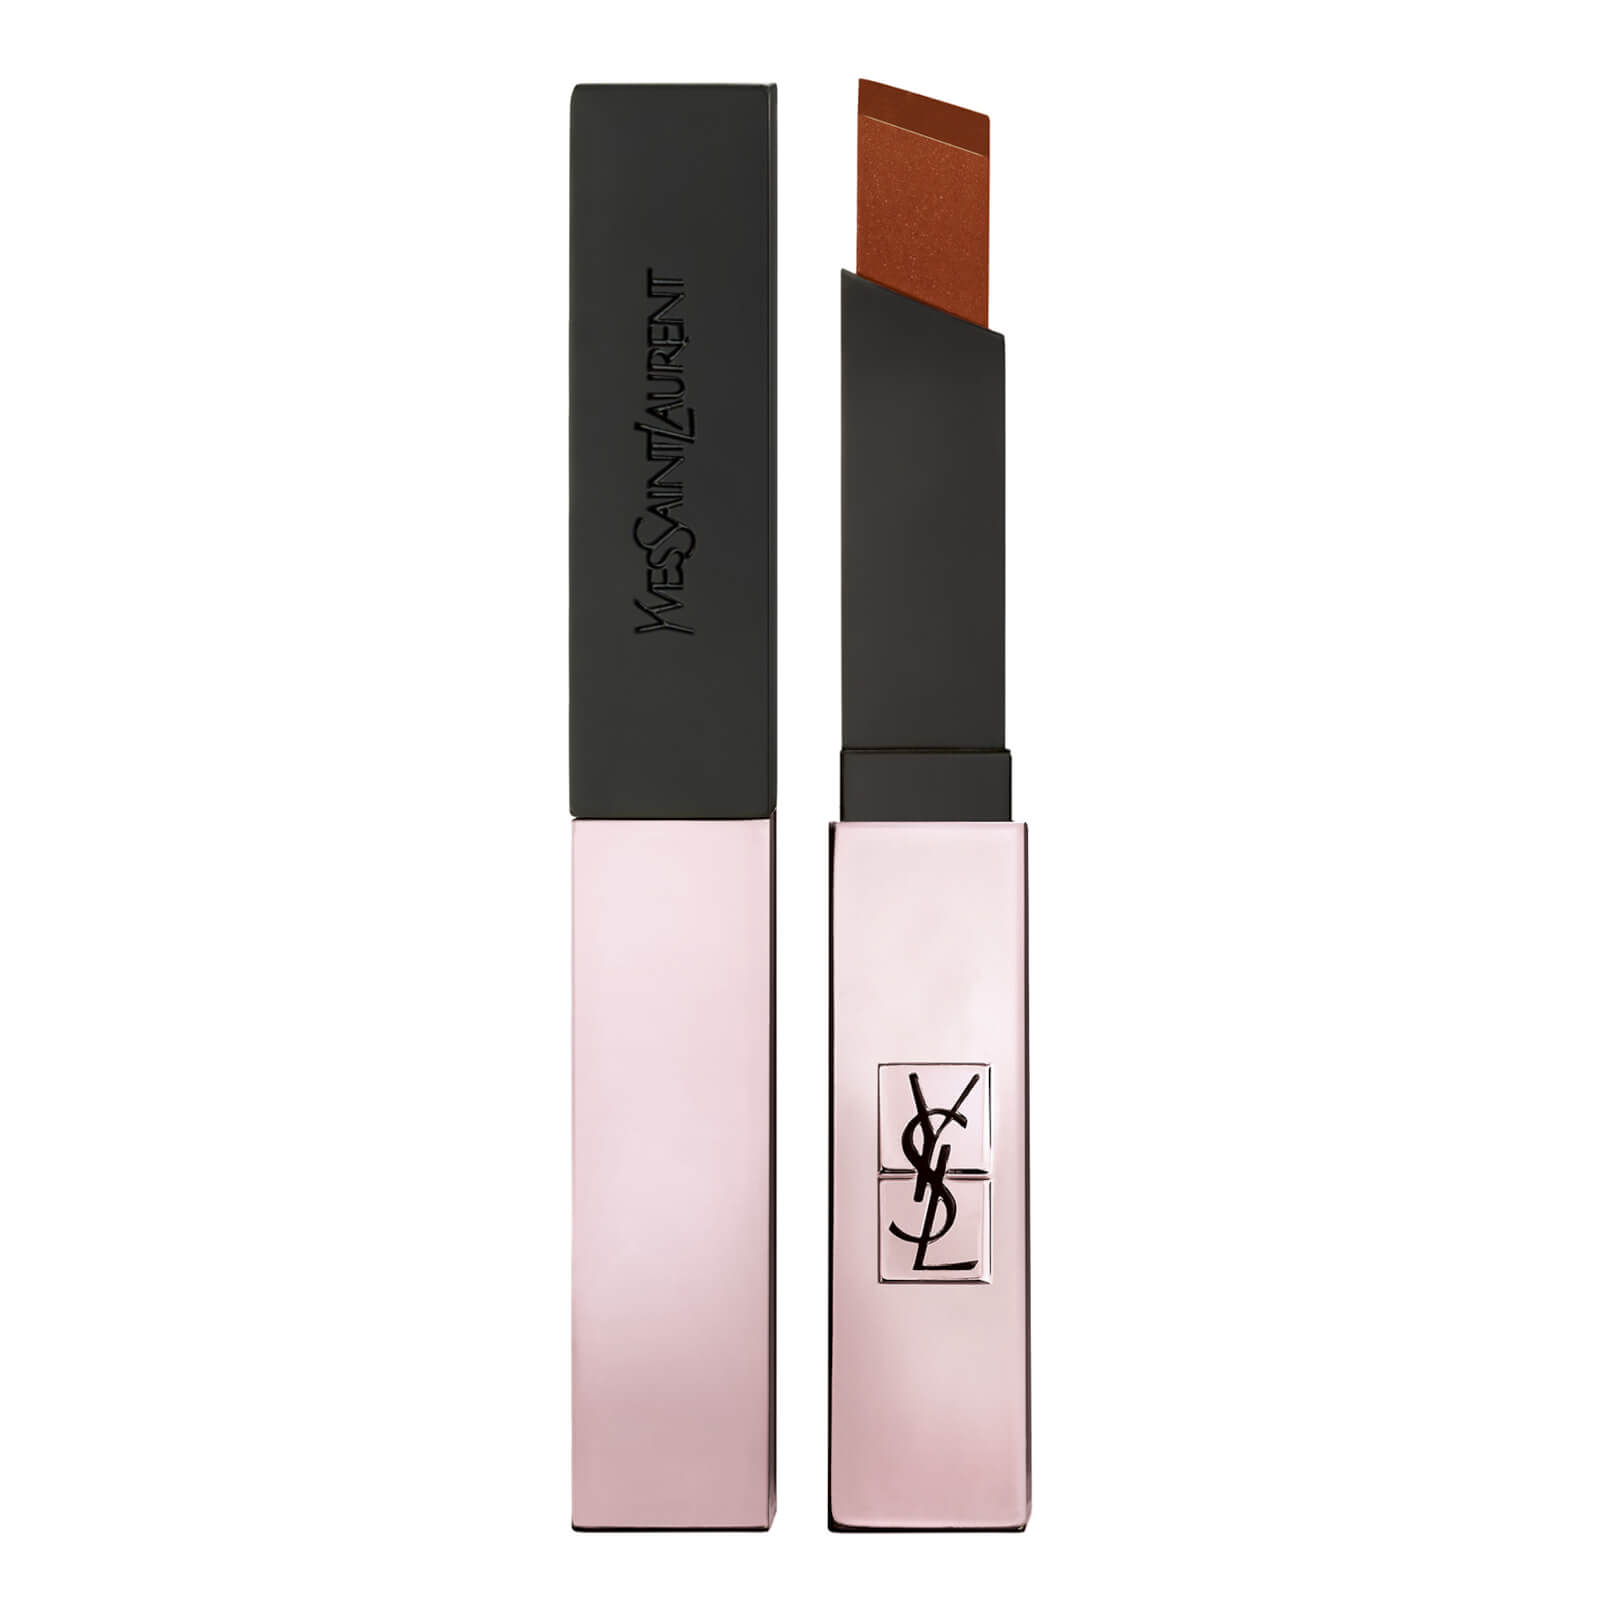 Yves Saint Laurent Rouge Pur Couture The Slim Glow Matte Lipstick 2g (Various Shades) - 214 No Taboo Orange